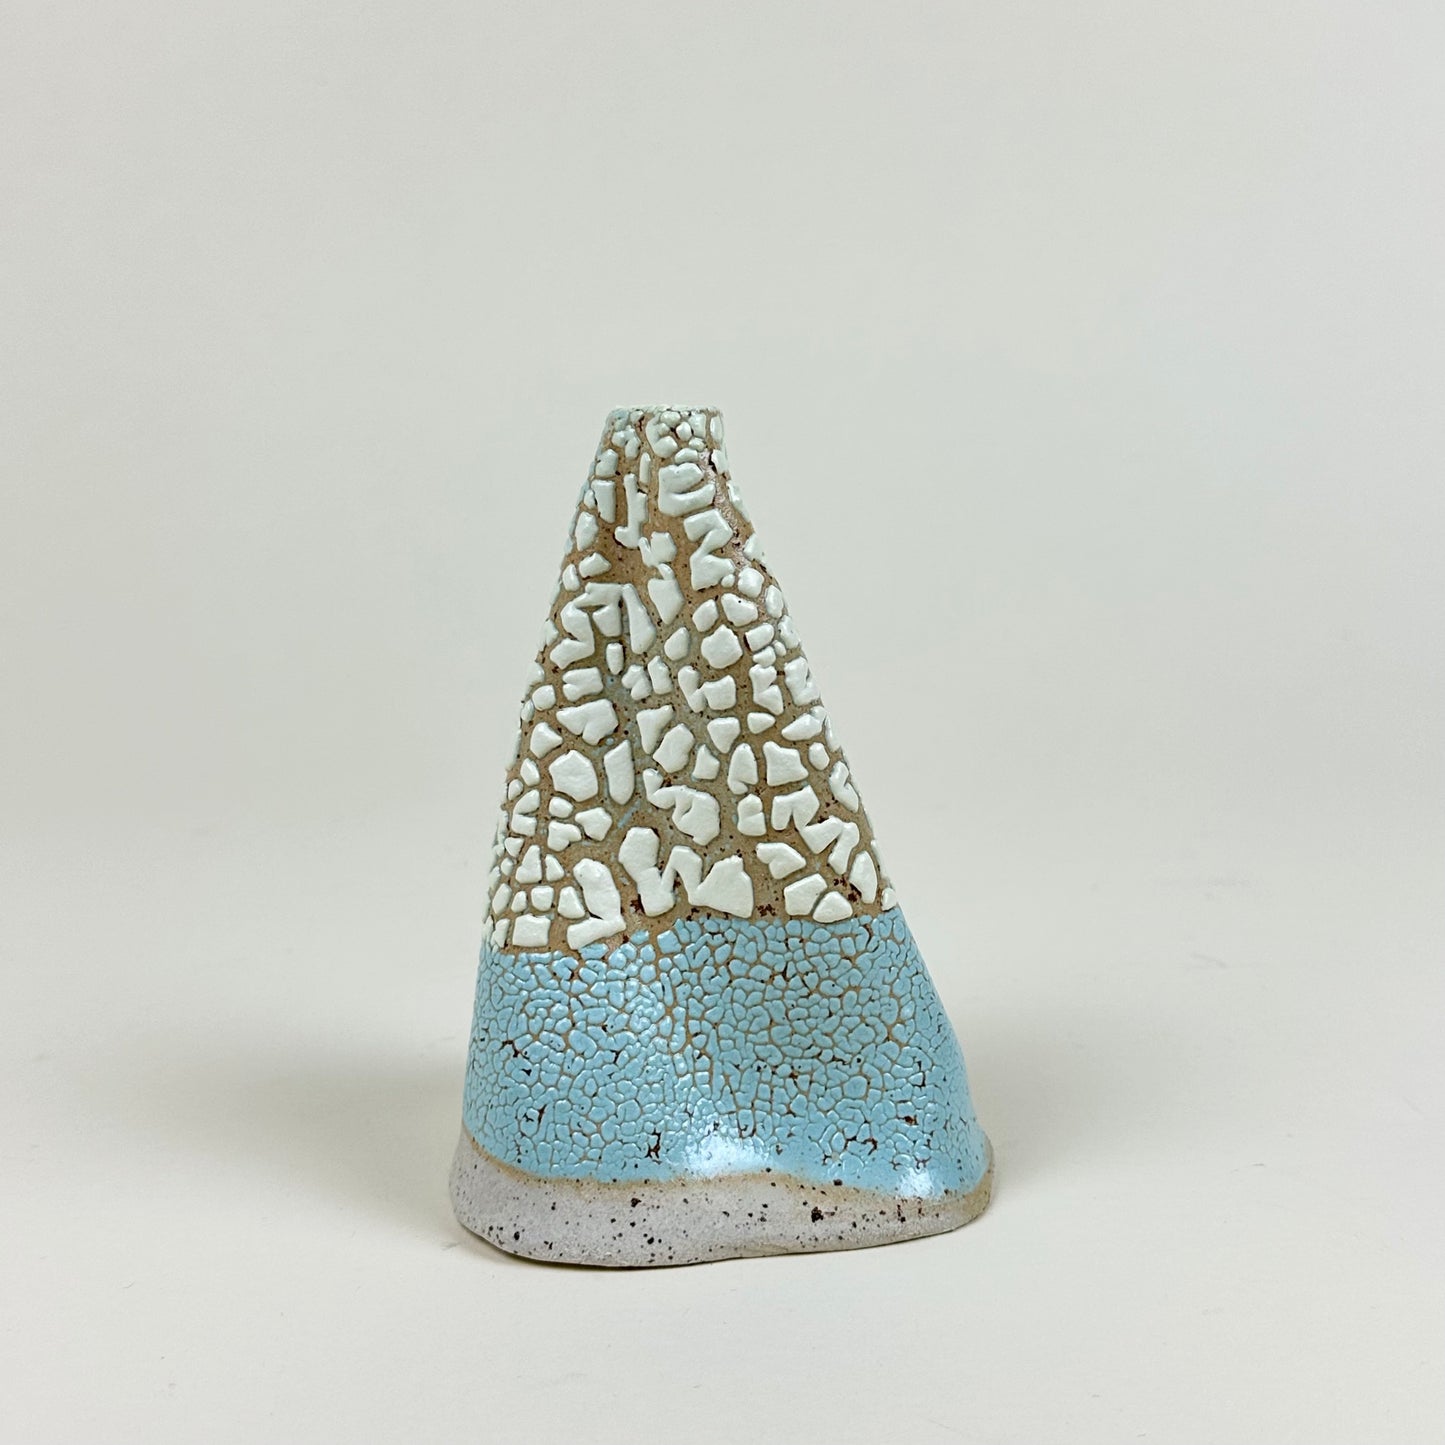 Light yellow and blue yellow volcano vase (L) by Astrid Öhman.